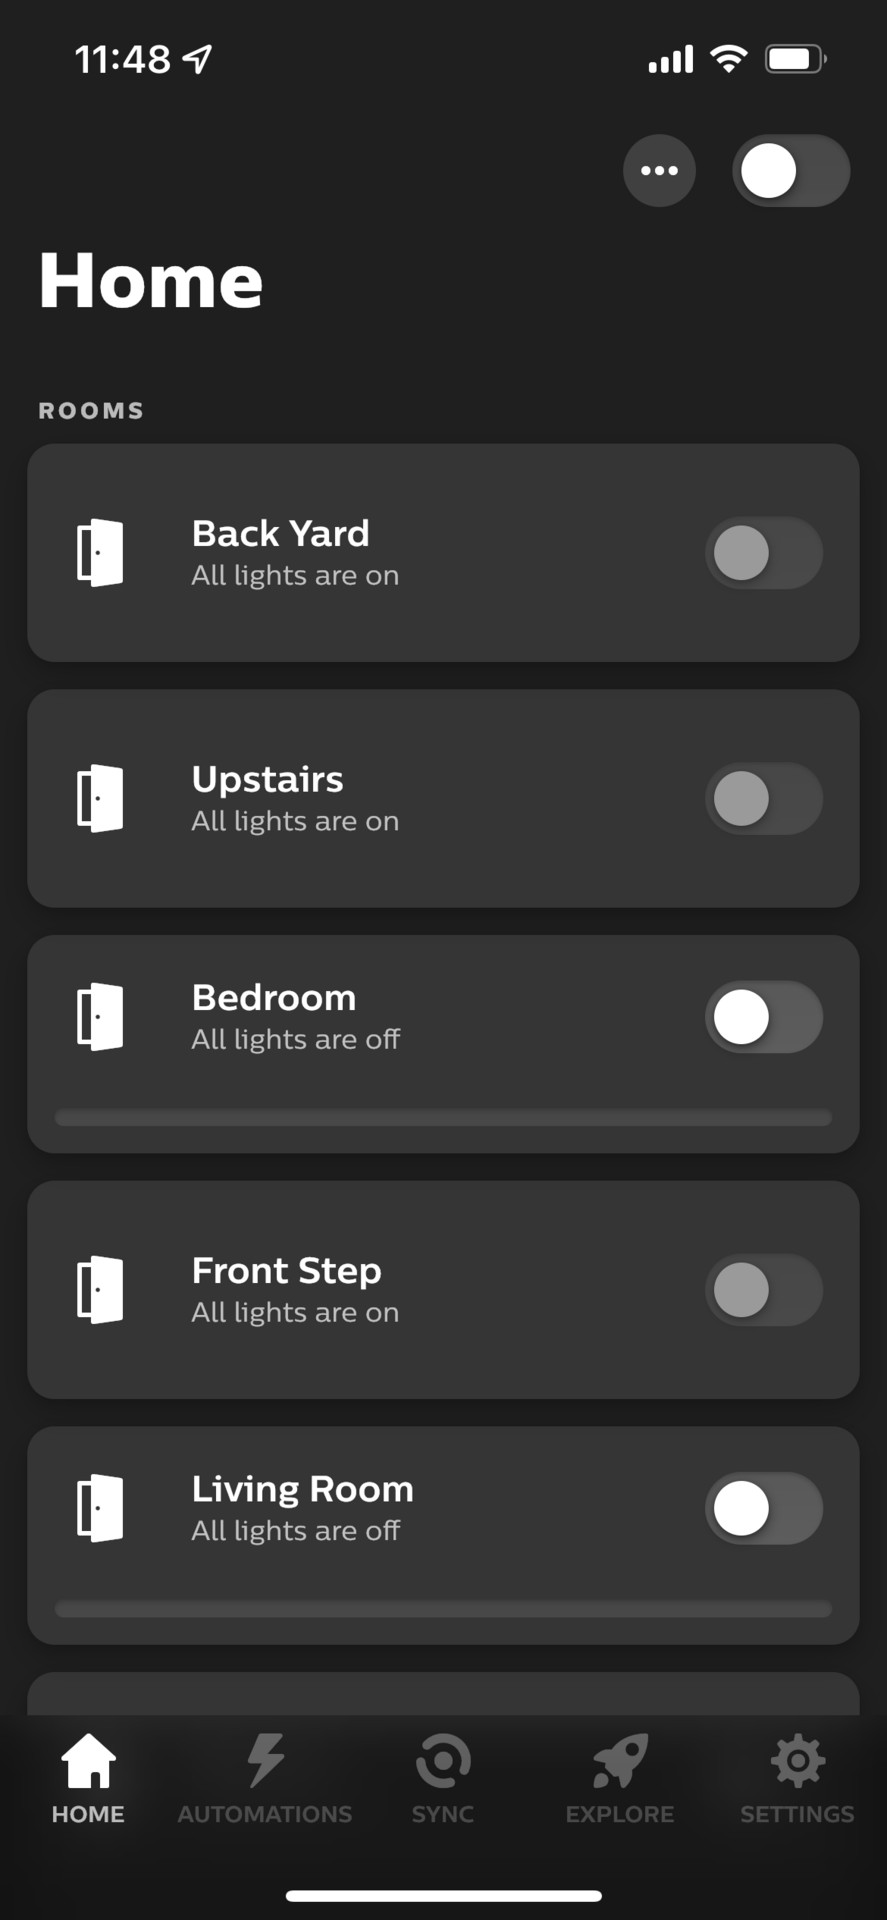 The Home tab for Philips Hue